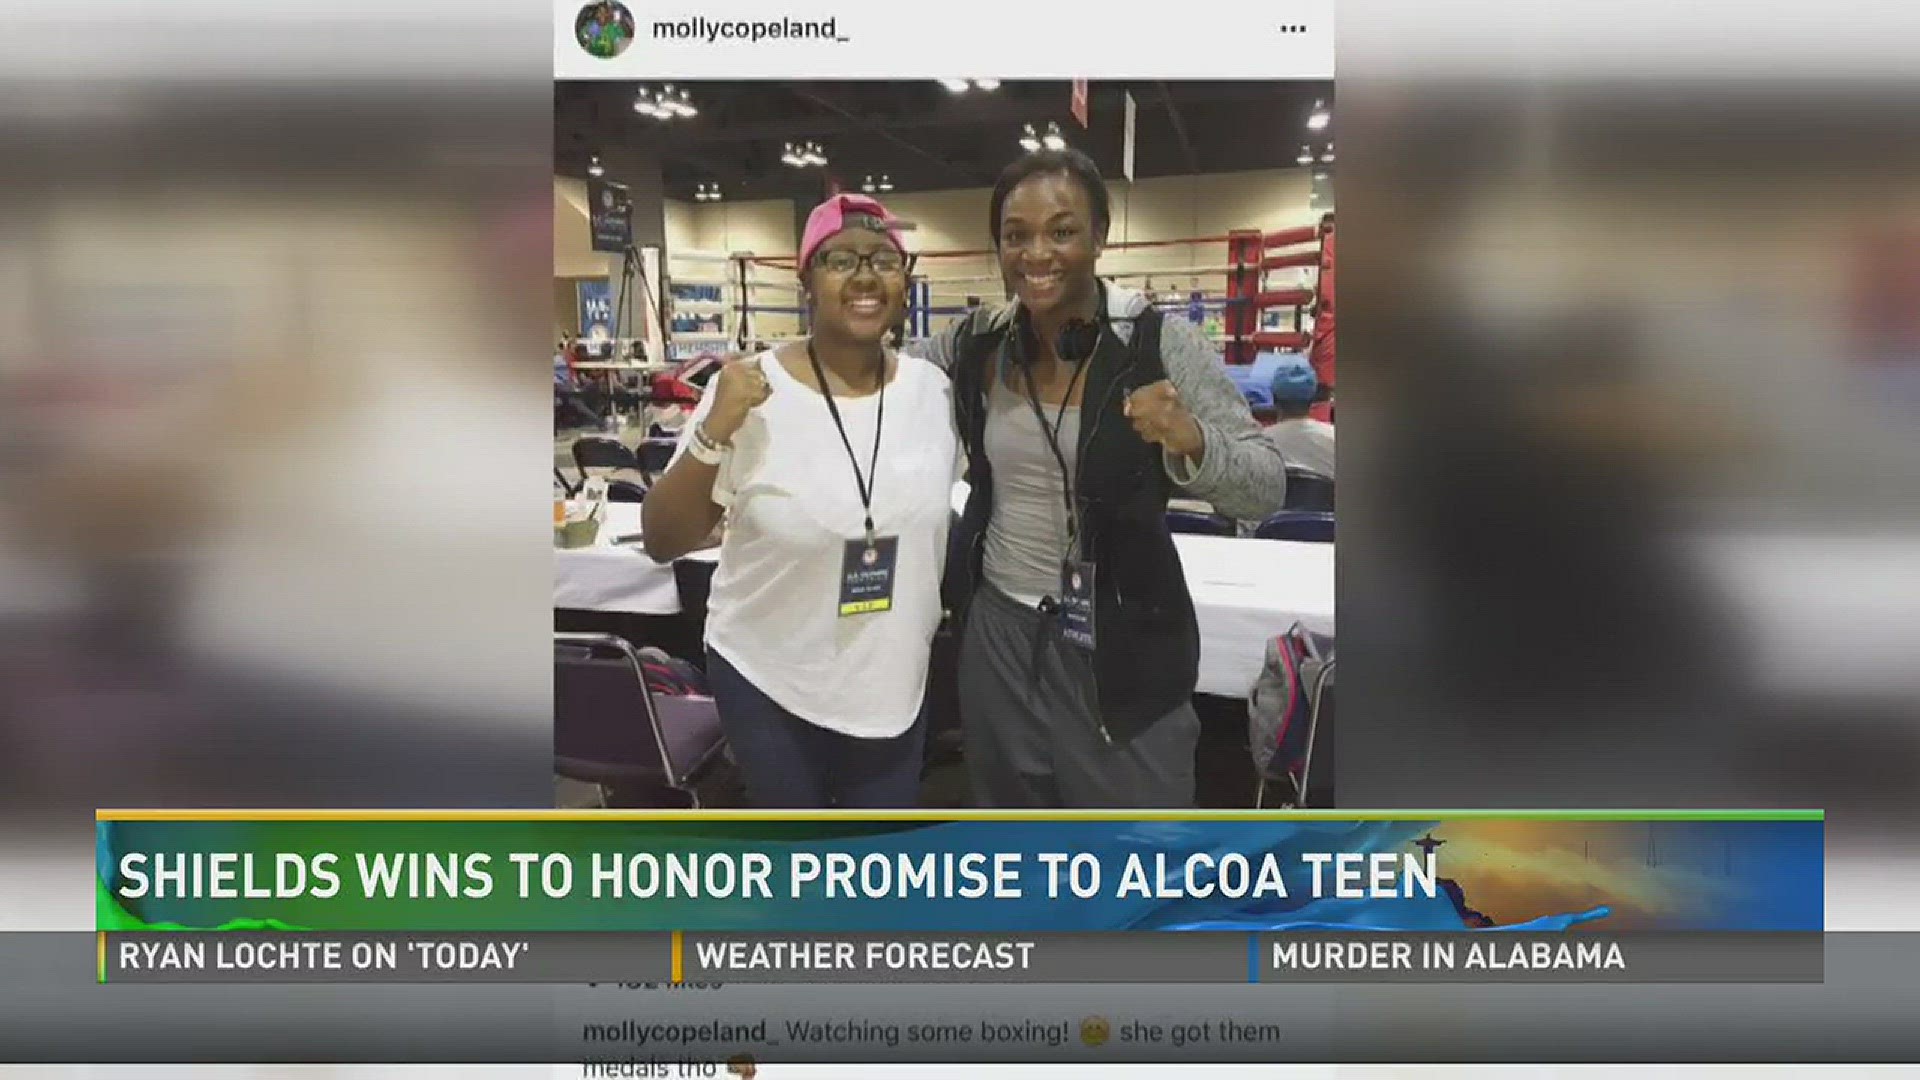 USA Boxer Claressa Shields wins back-to-back gold medals to honor promise she made to Alcoa teen Hannah Tate before Tate died from cancer.